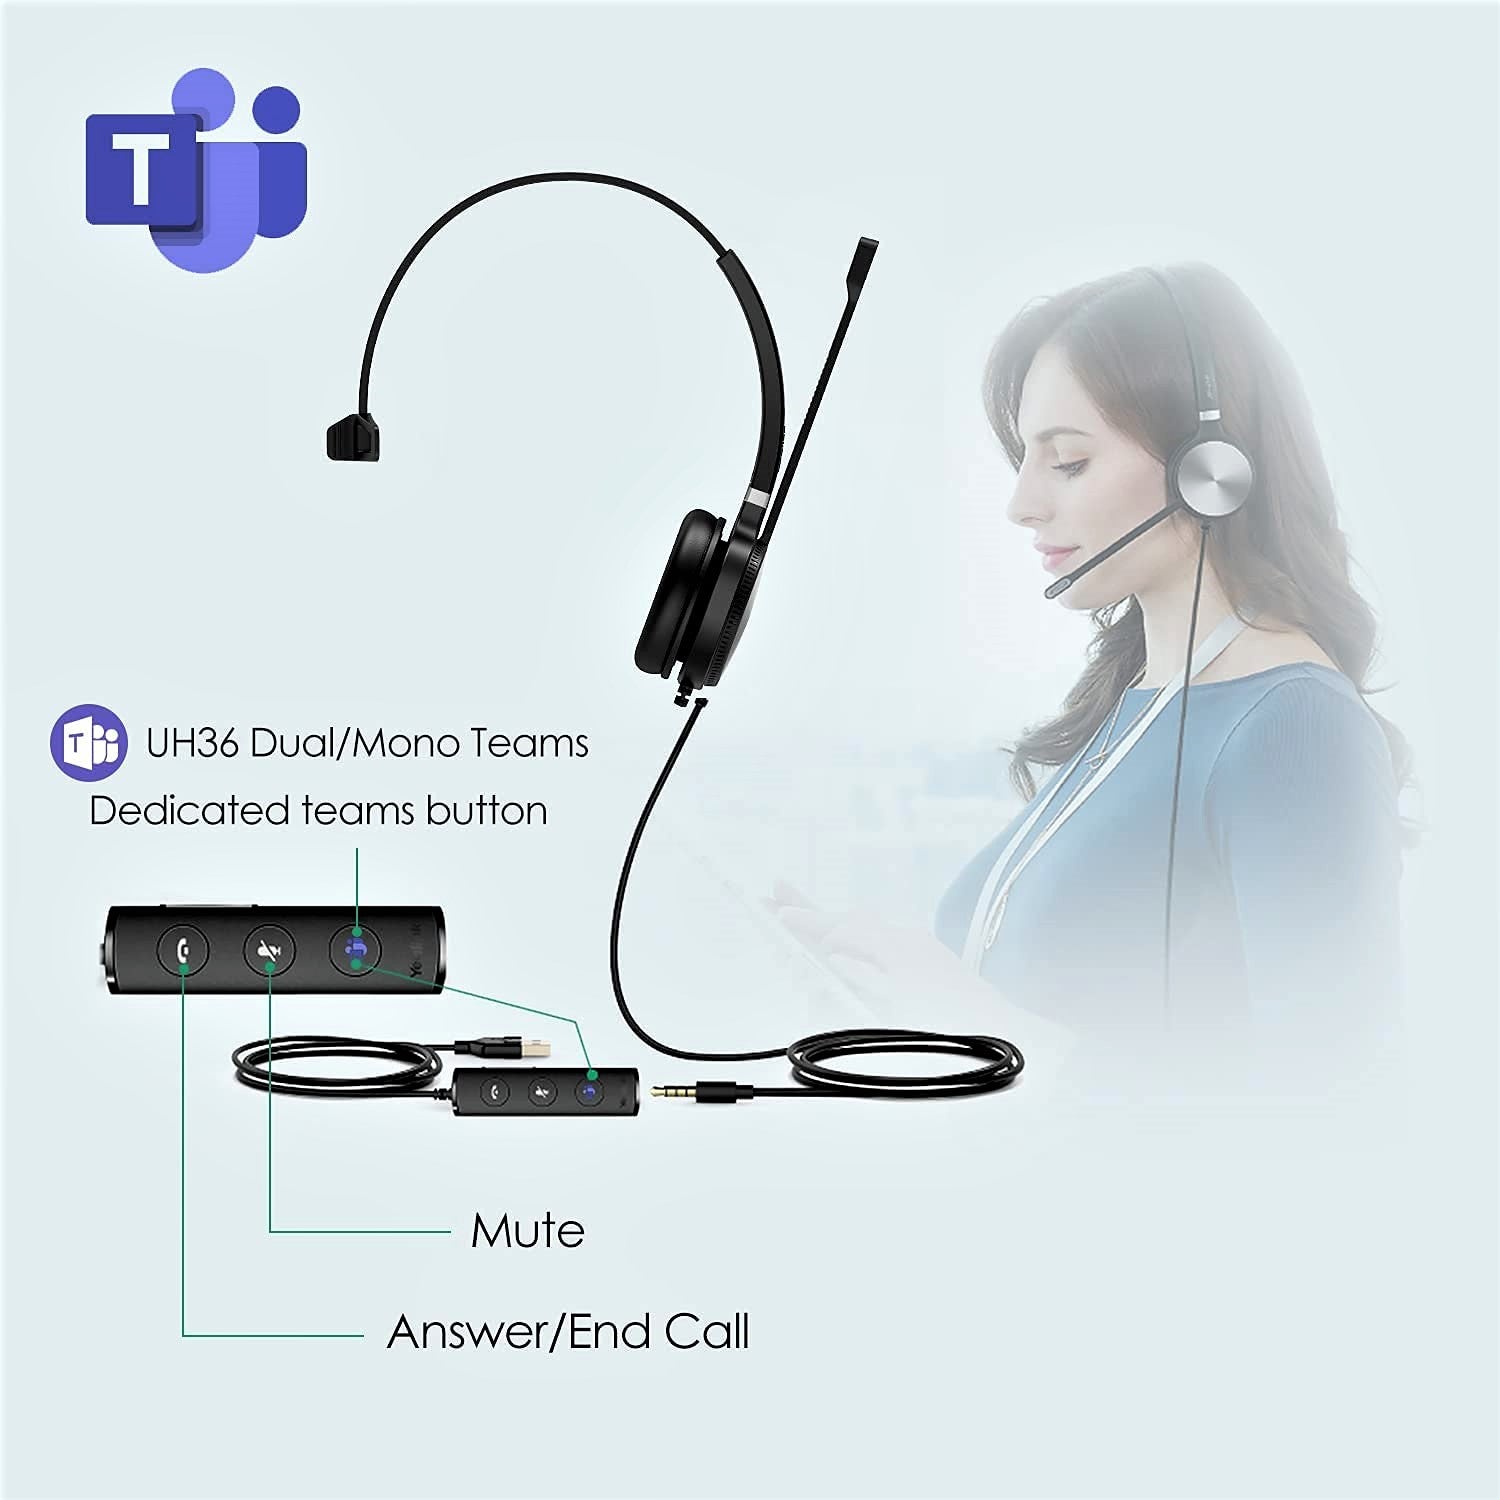 Yealink Teams Certified Telephone Headset Microphone USB Wired UH36 UH34 Noise Cancelling with Mic for Computer PC Laptop Stereo for Calls and Music 3.5mm Jack